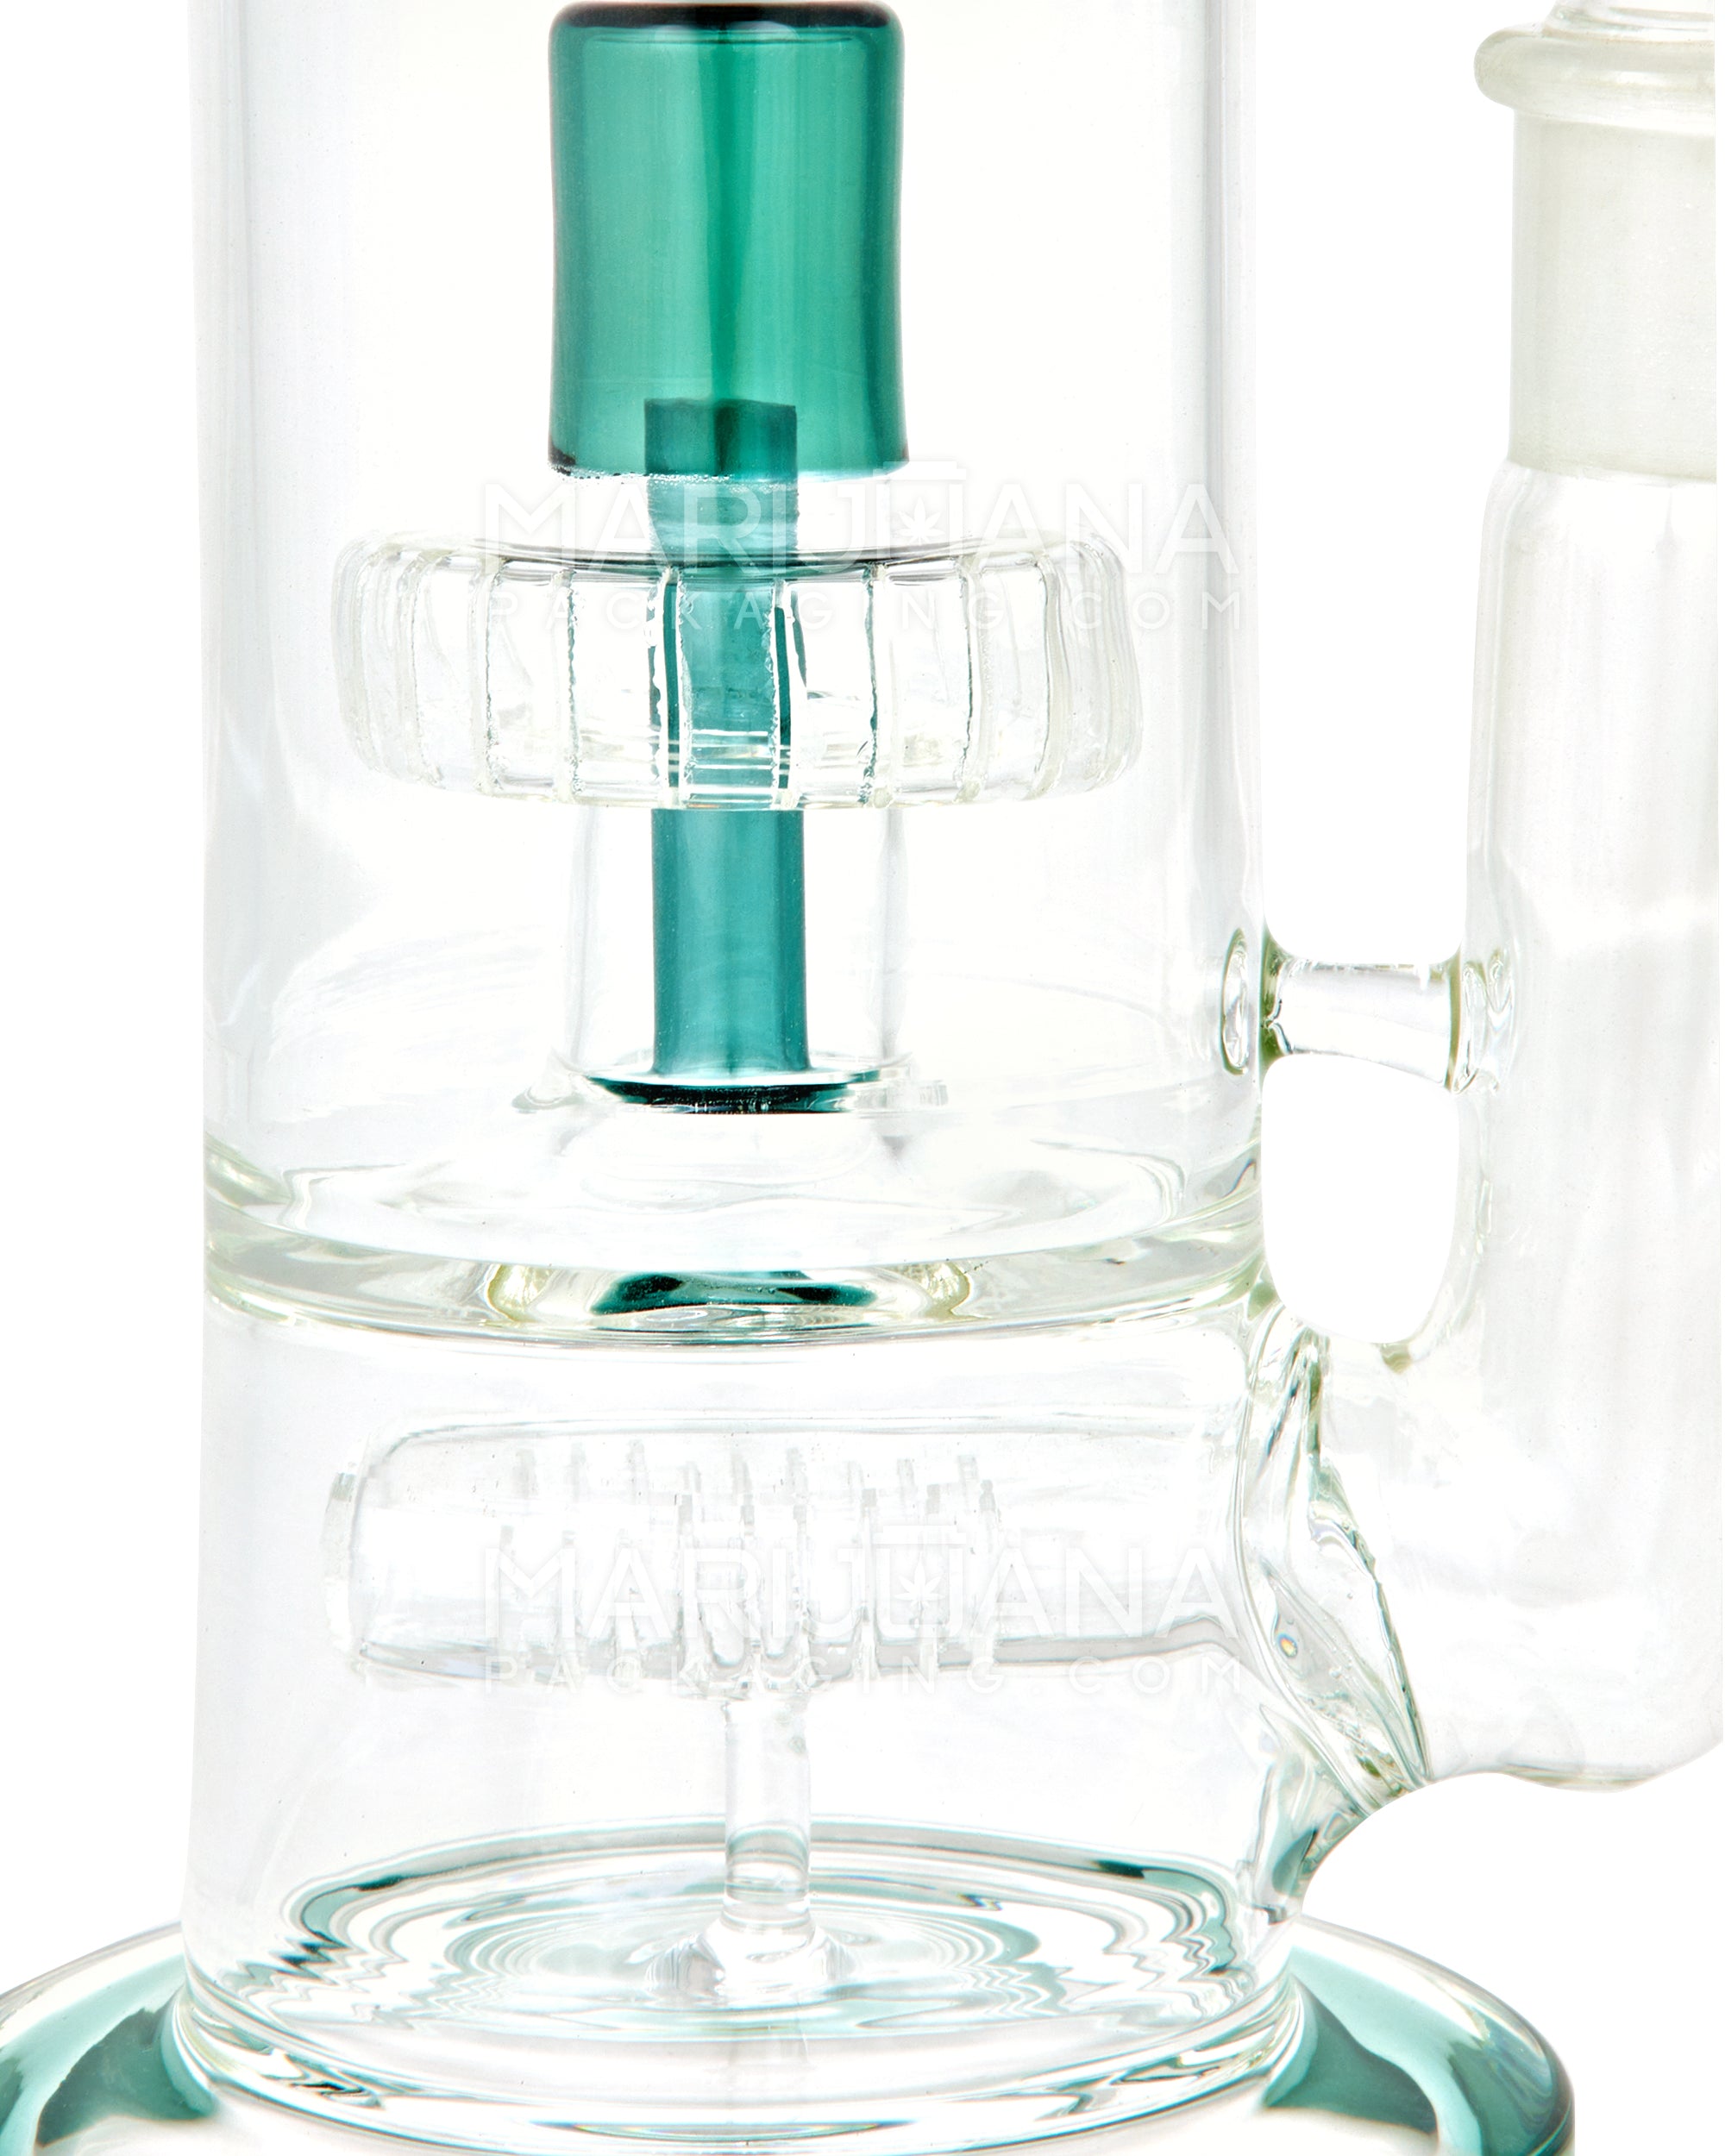 Double Chamber | Straight Neck Showerhead Perc Glass Water Pipe w/ Thick Base | 13in Tall - 18mm Bowl - Teal - 6